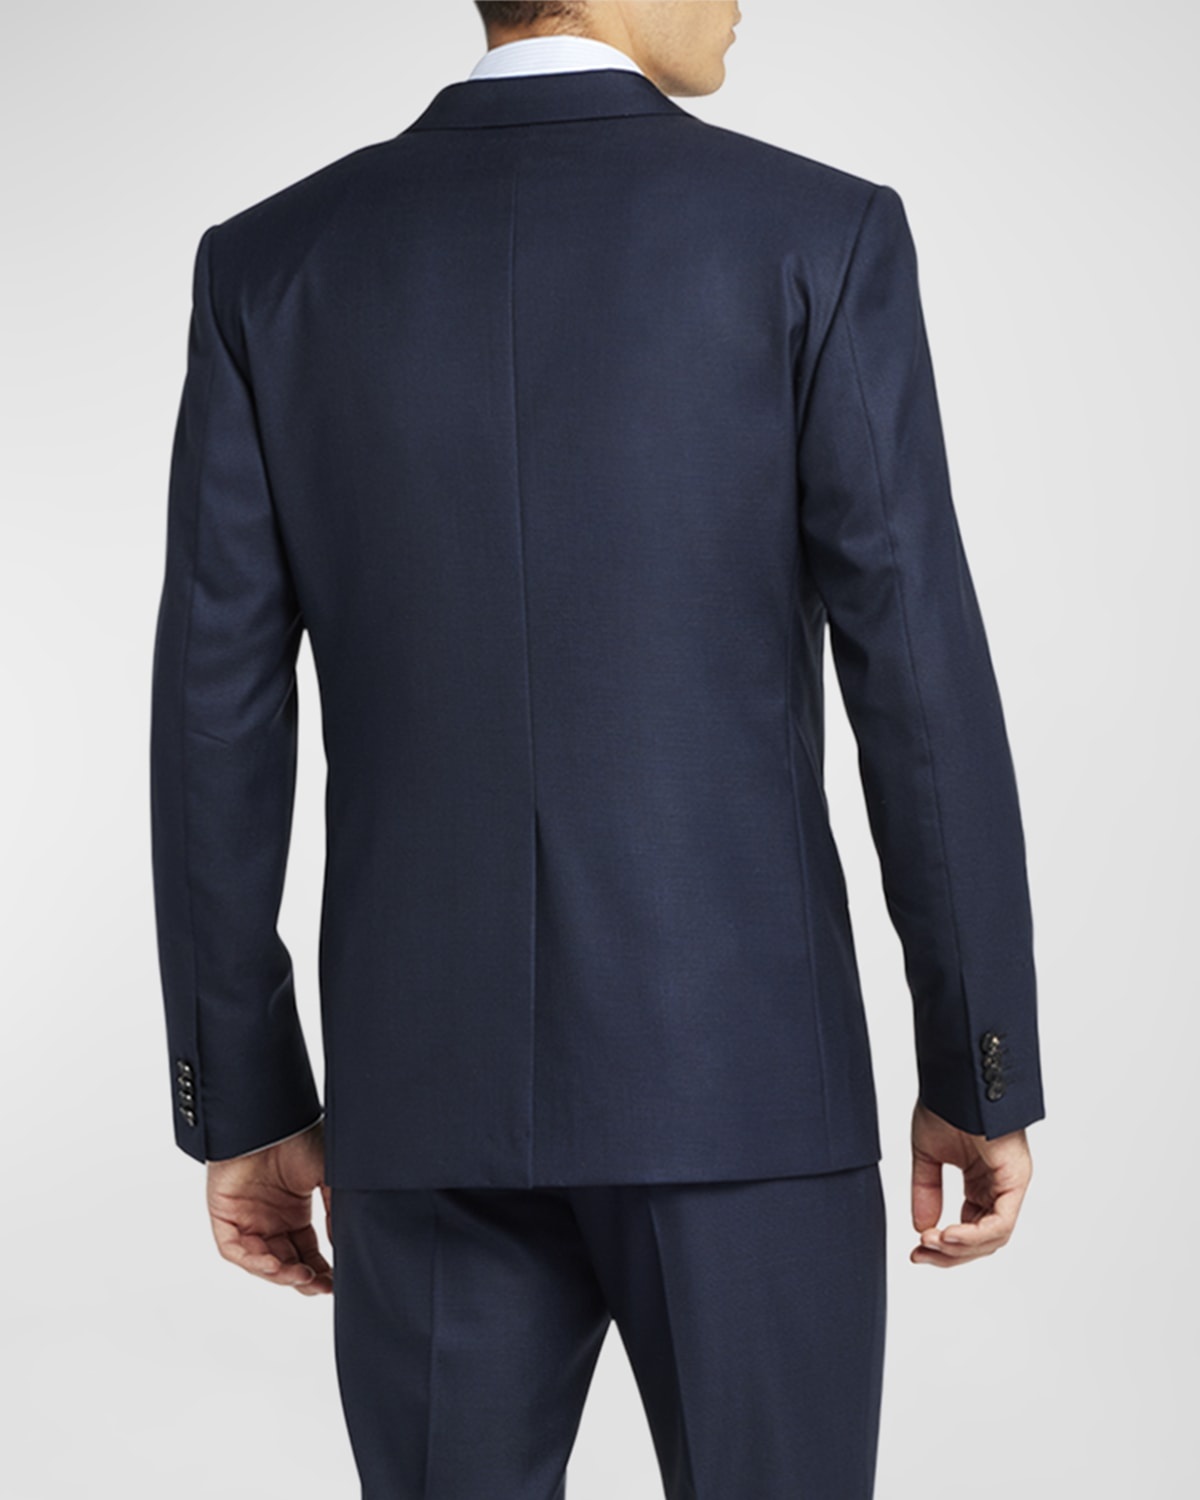 Men's Modern-Fit Wool Two-Button Suit - 6